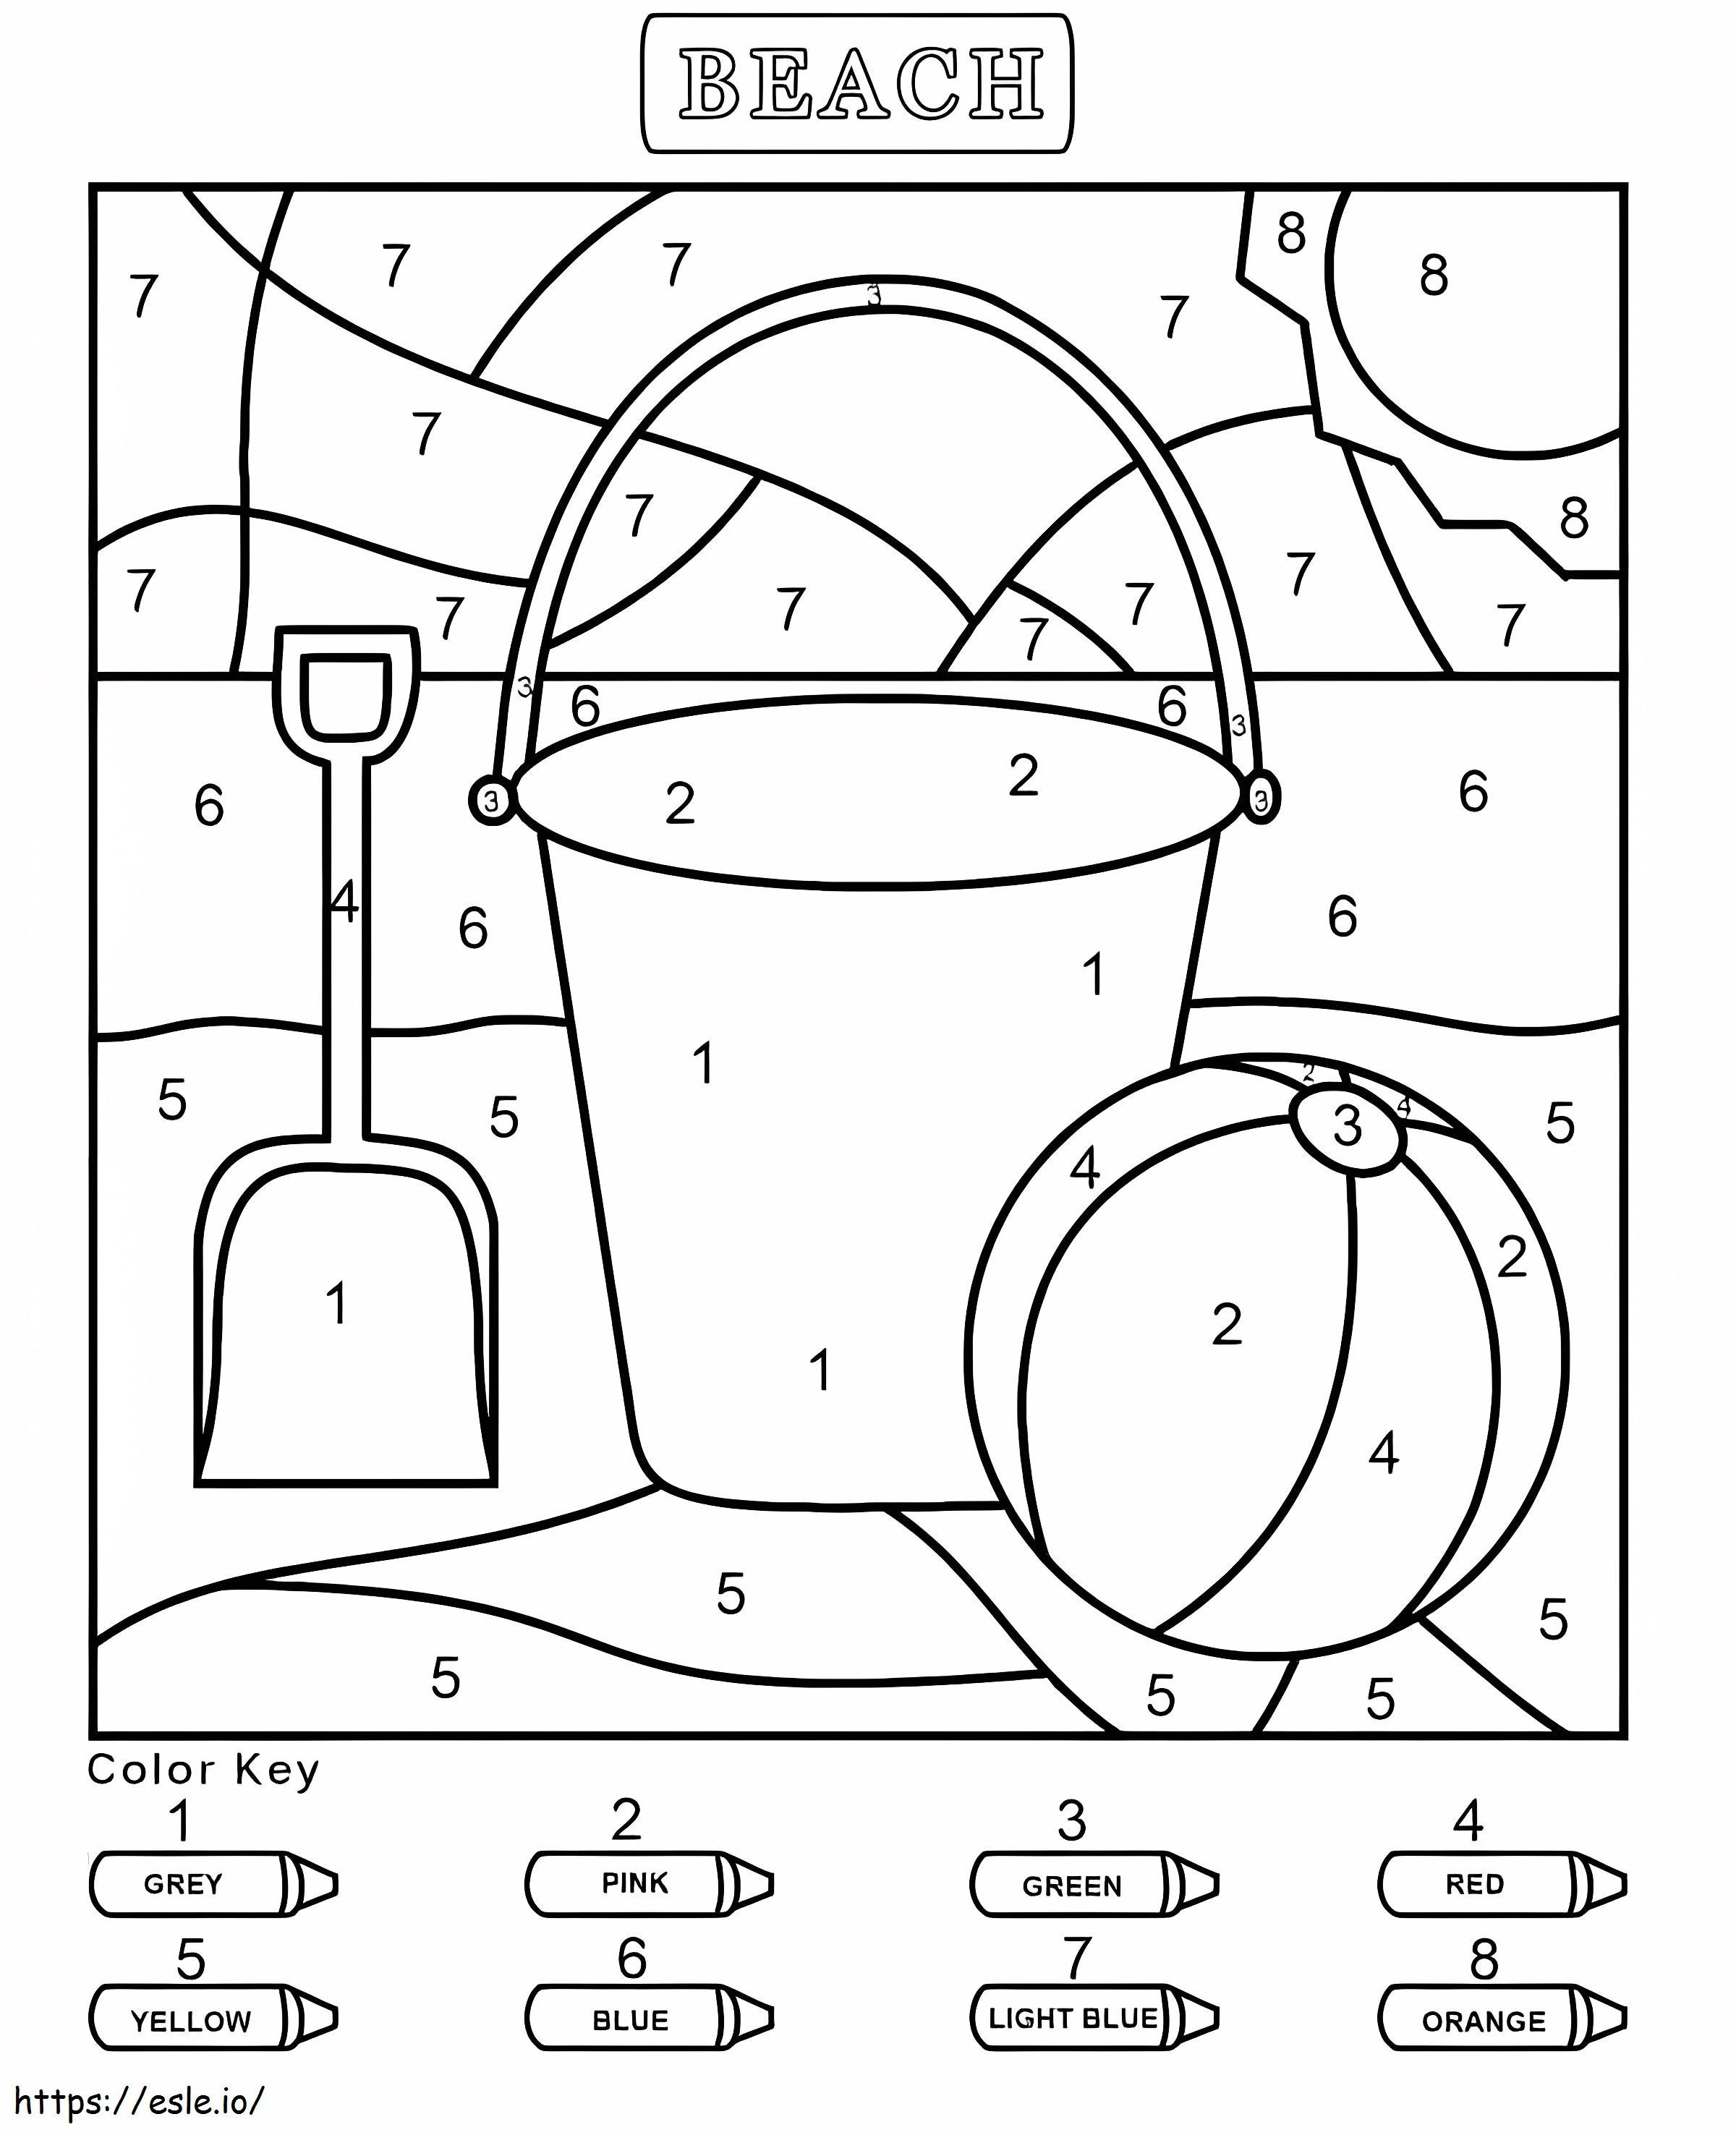 Beach For Kindergarten Color By Number coloring page